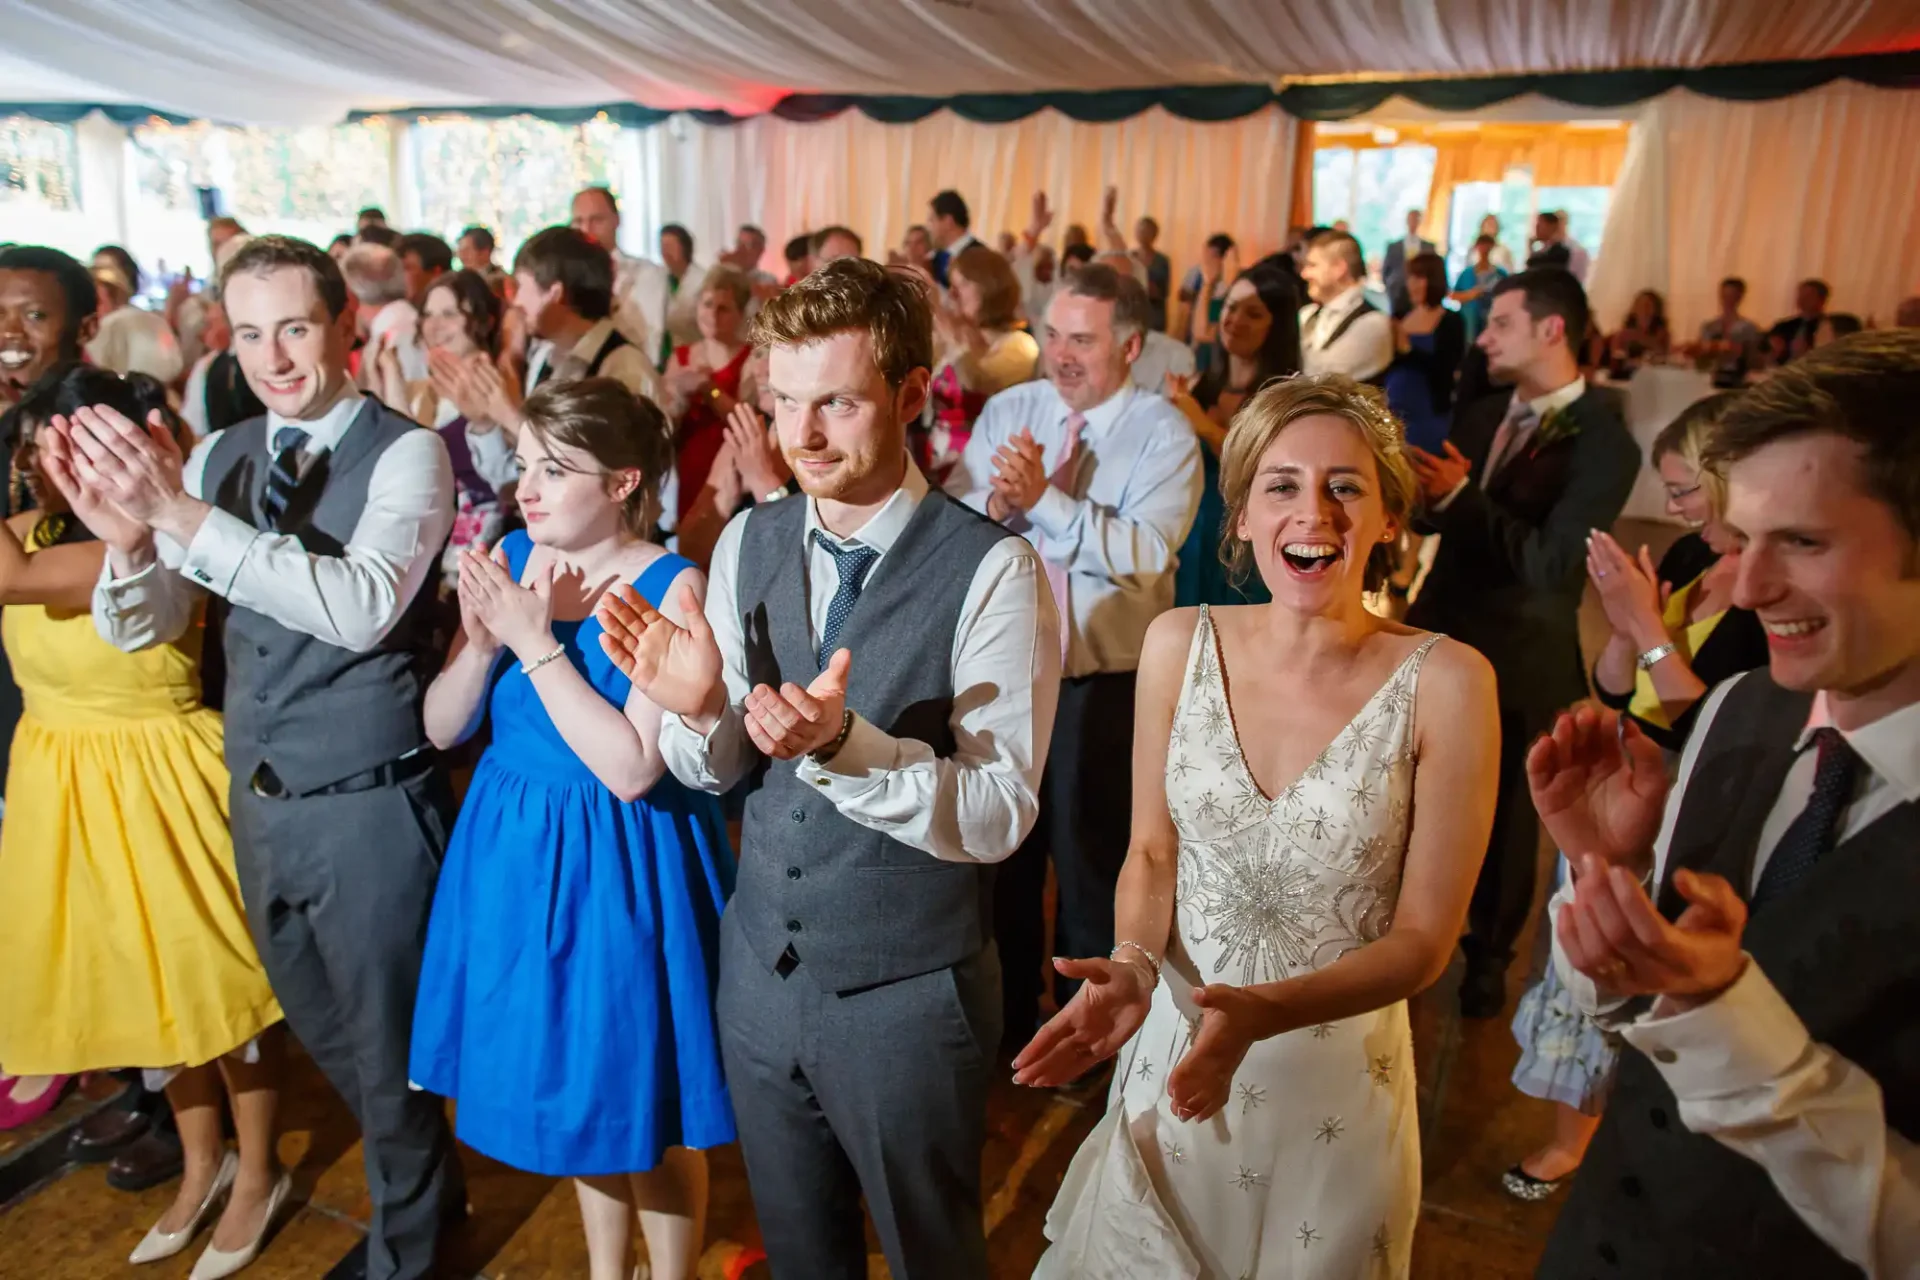 Wedding guests clapping and dancing in a lively reception tent, featuring a joyful bride and groom at the center.